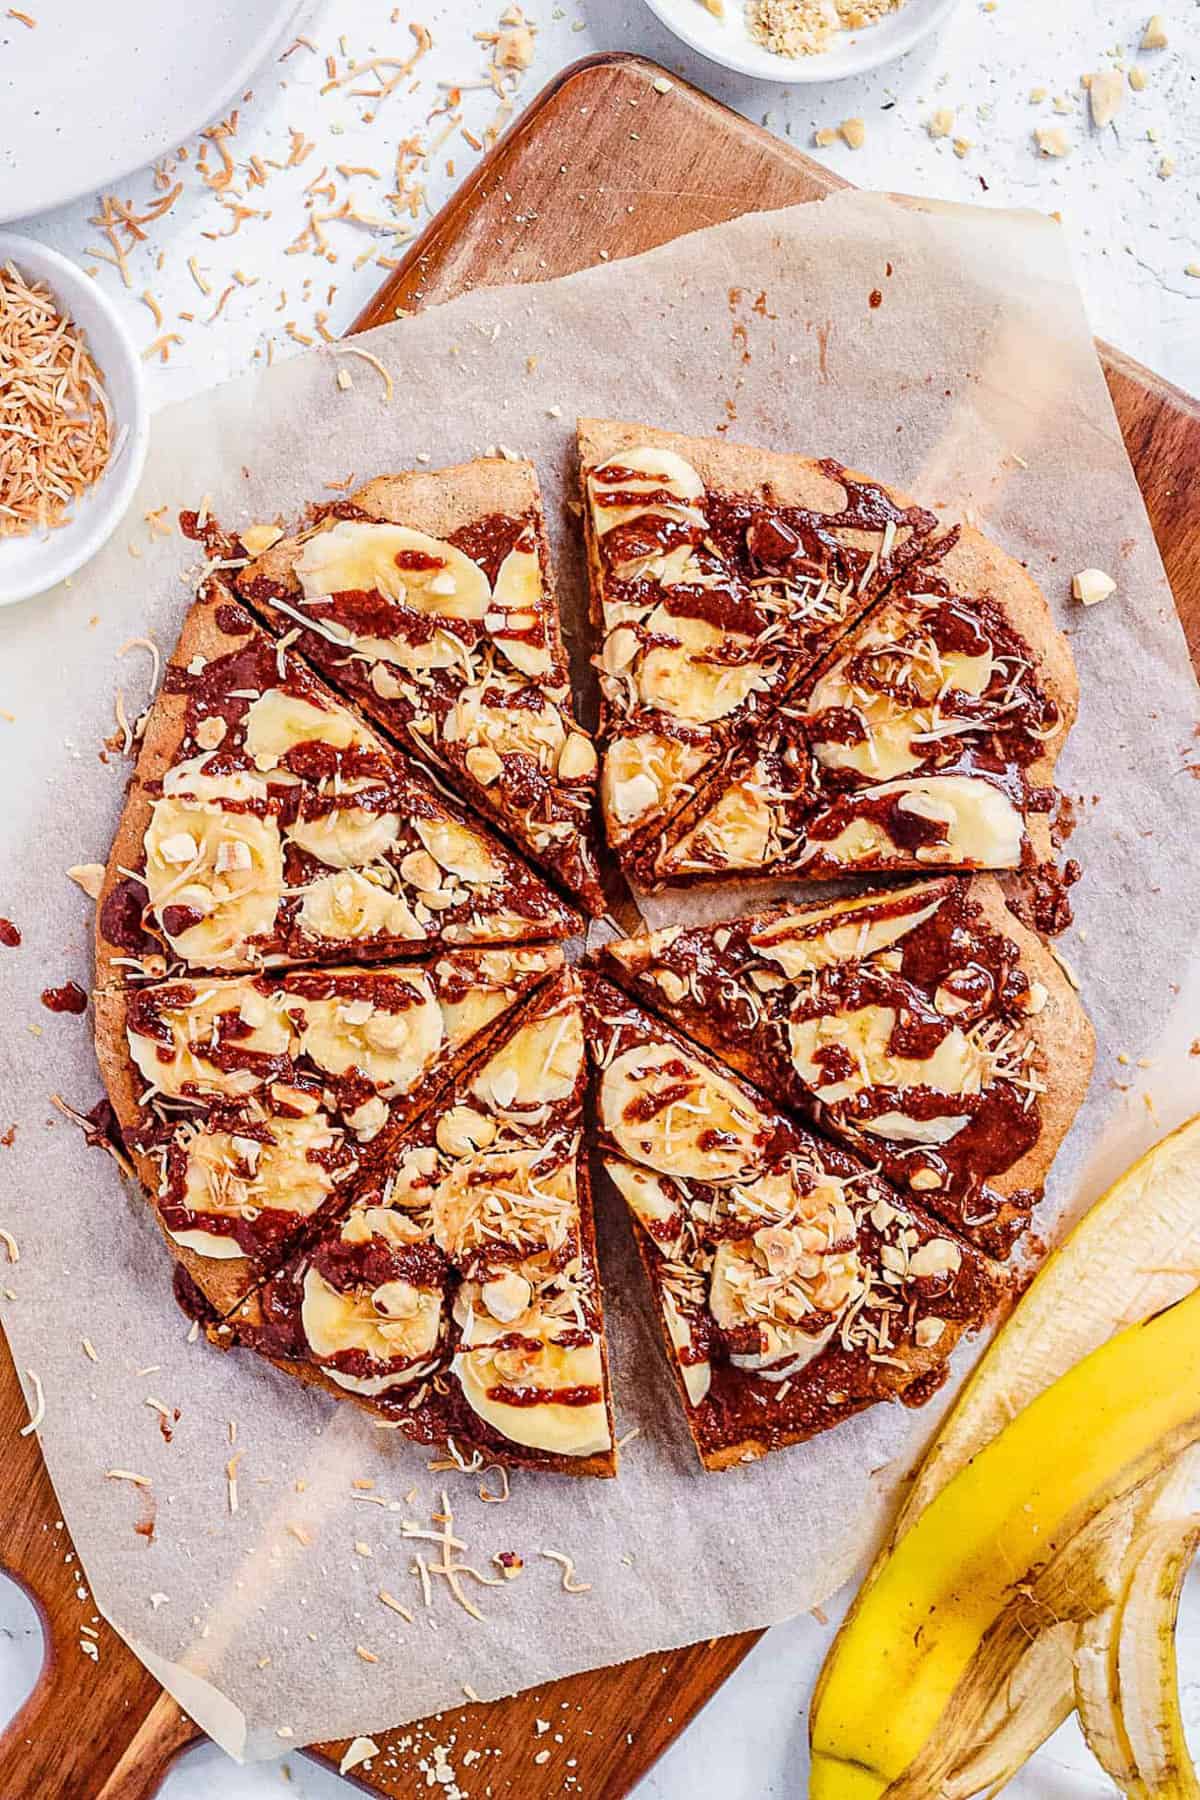 Top view of Nutella pizza with banana (dessert pizza recipe) on parchment paper.